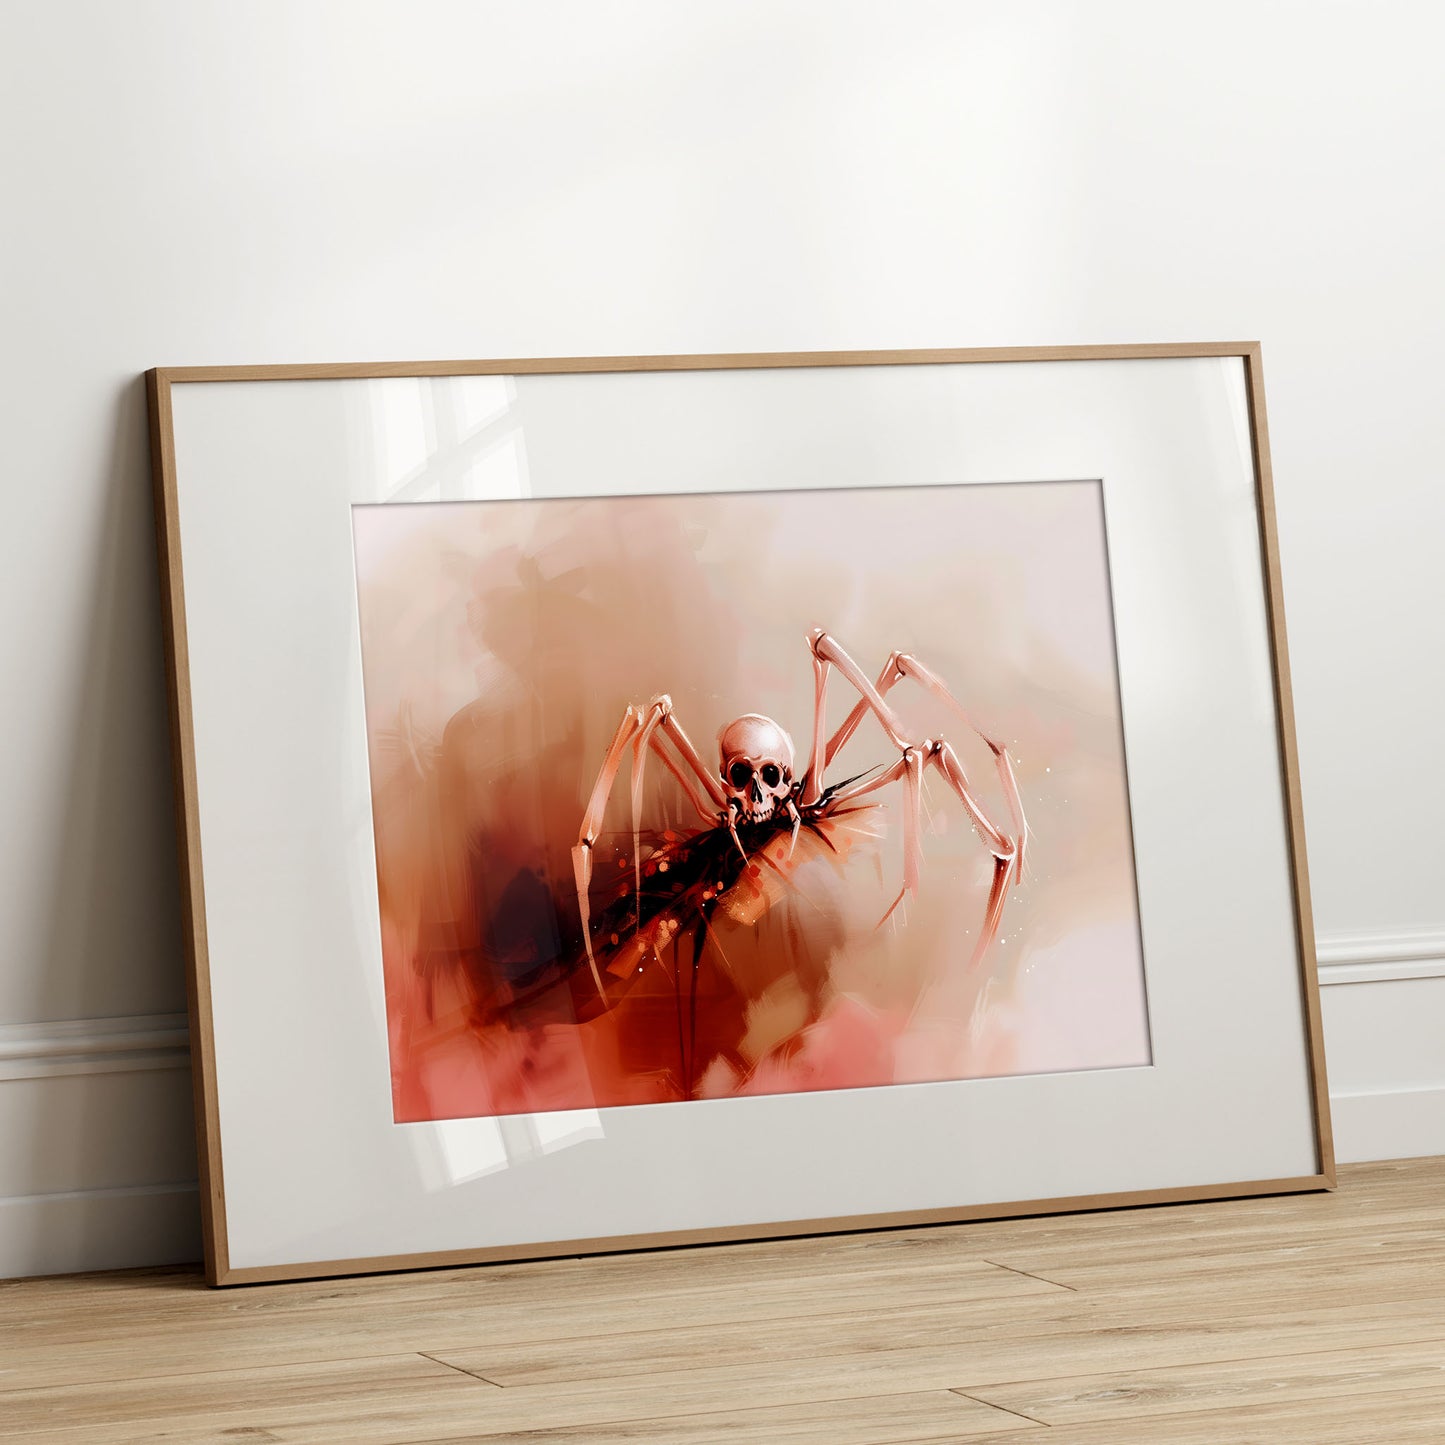 Coral Skeletal Spider Painting - Warm Color Wall Art for Creepy Beauty